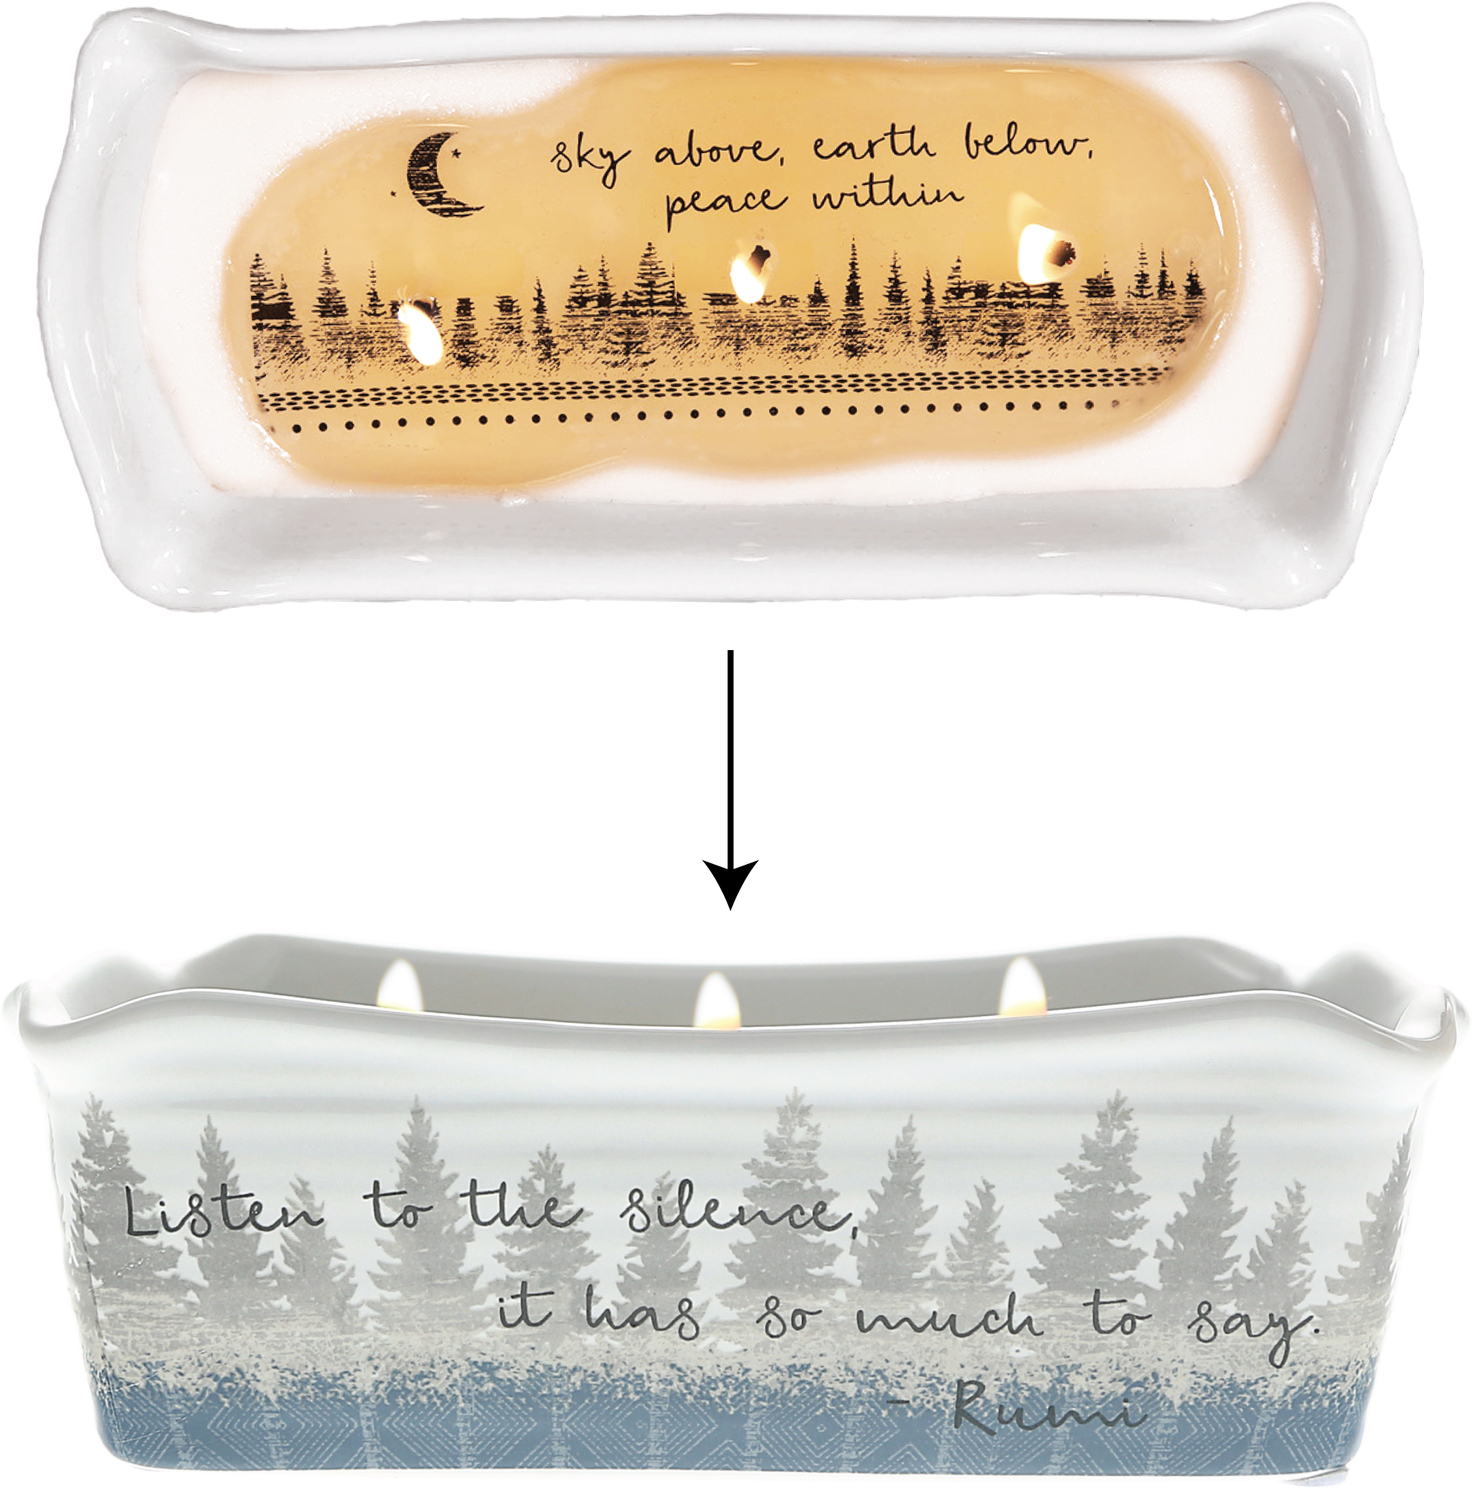 Listen by Wild Woods Lodge - Listen - 12 oz - 100% Soy Wax Reveal, Triple Wick Candle
Scent: Tranquility